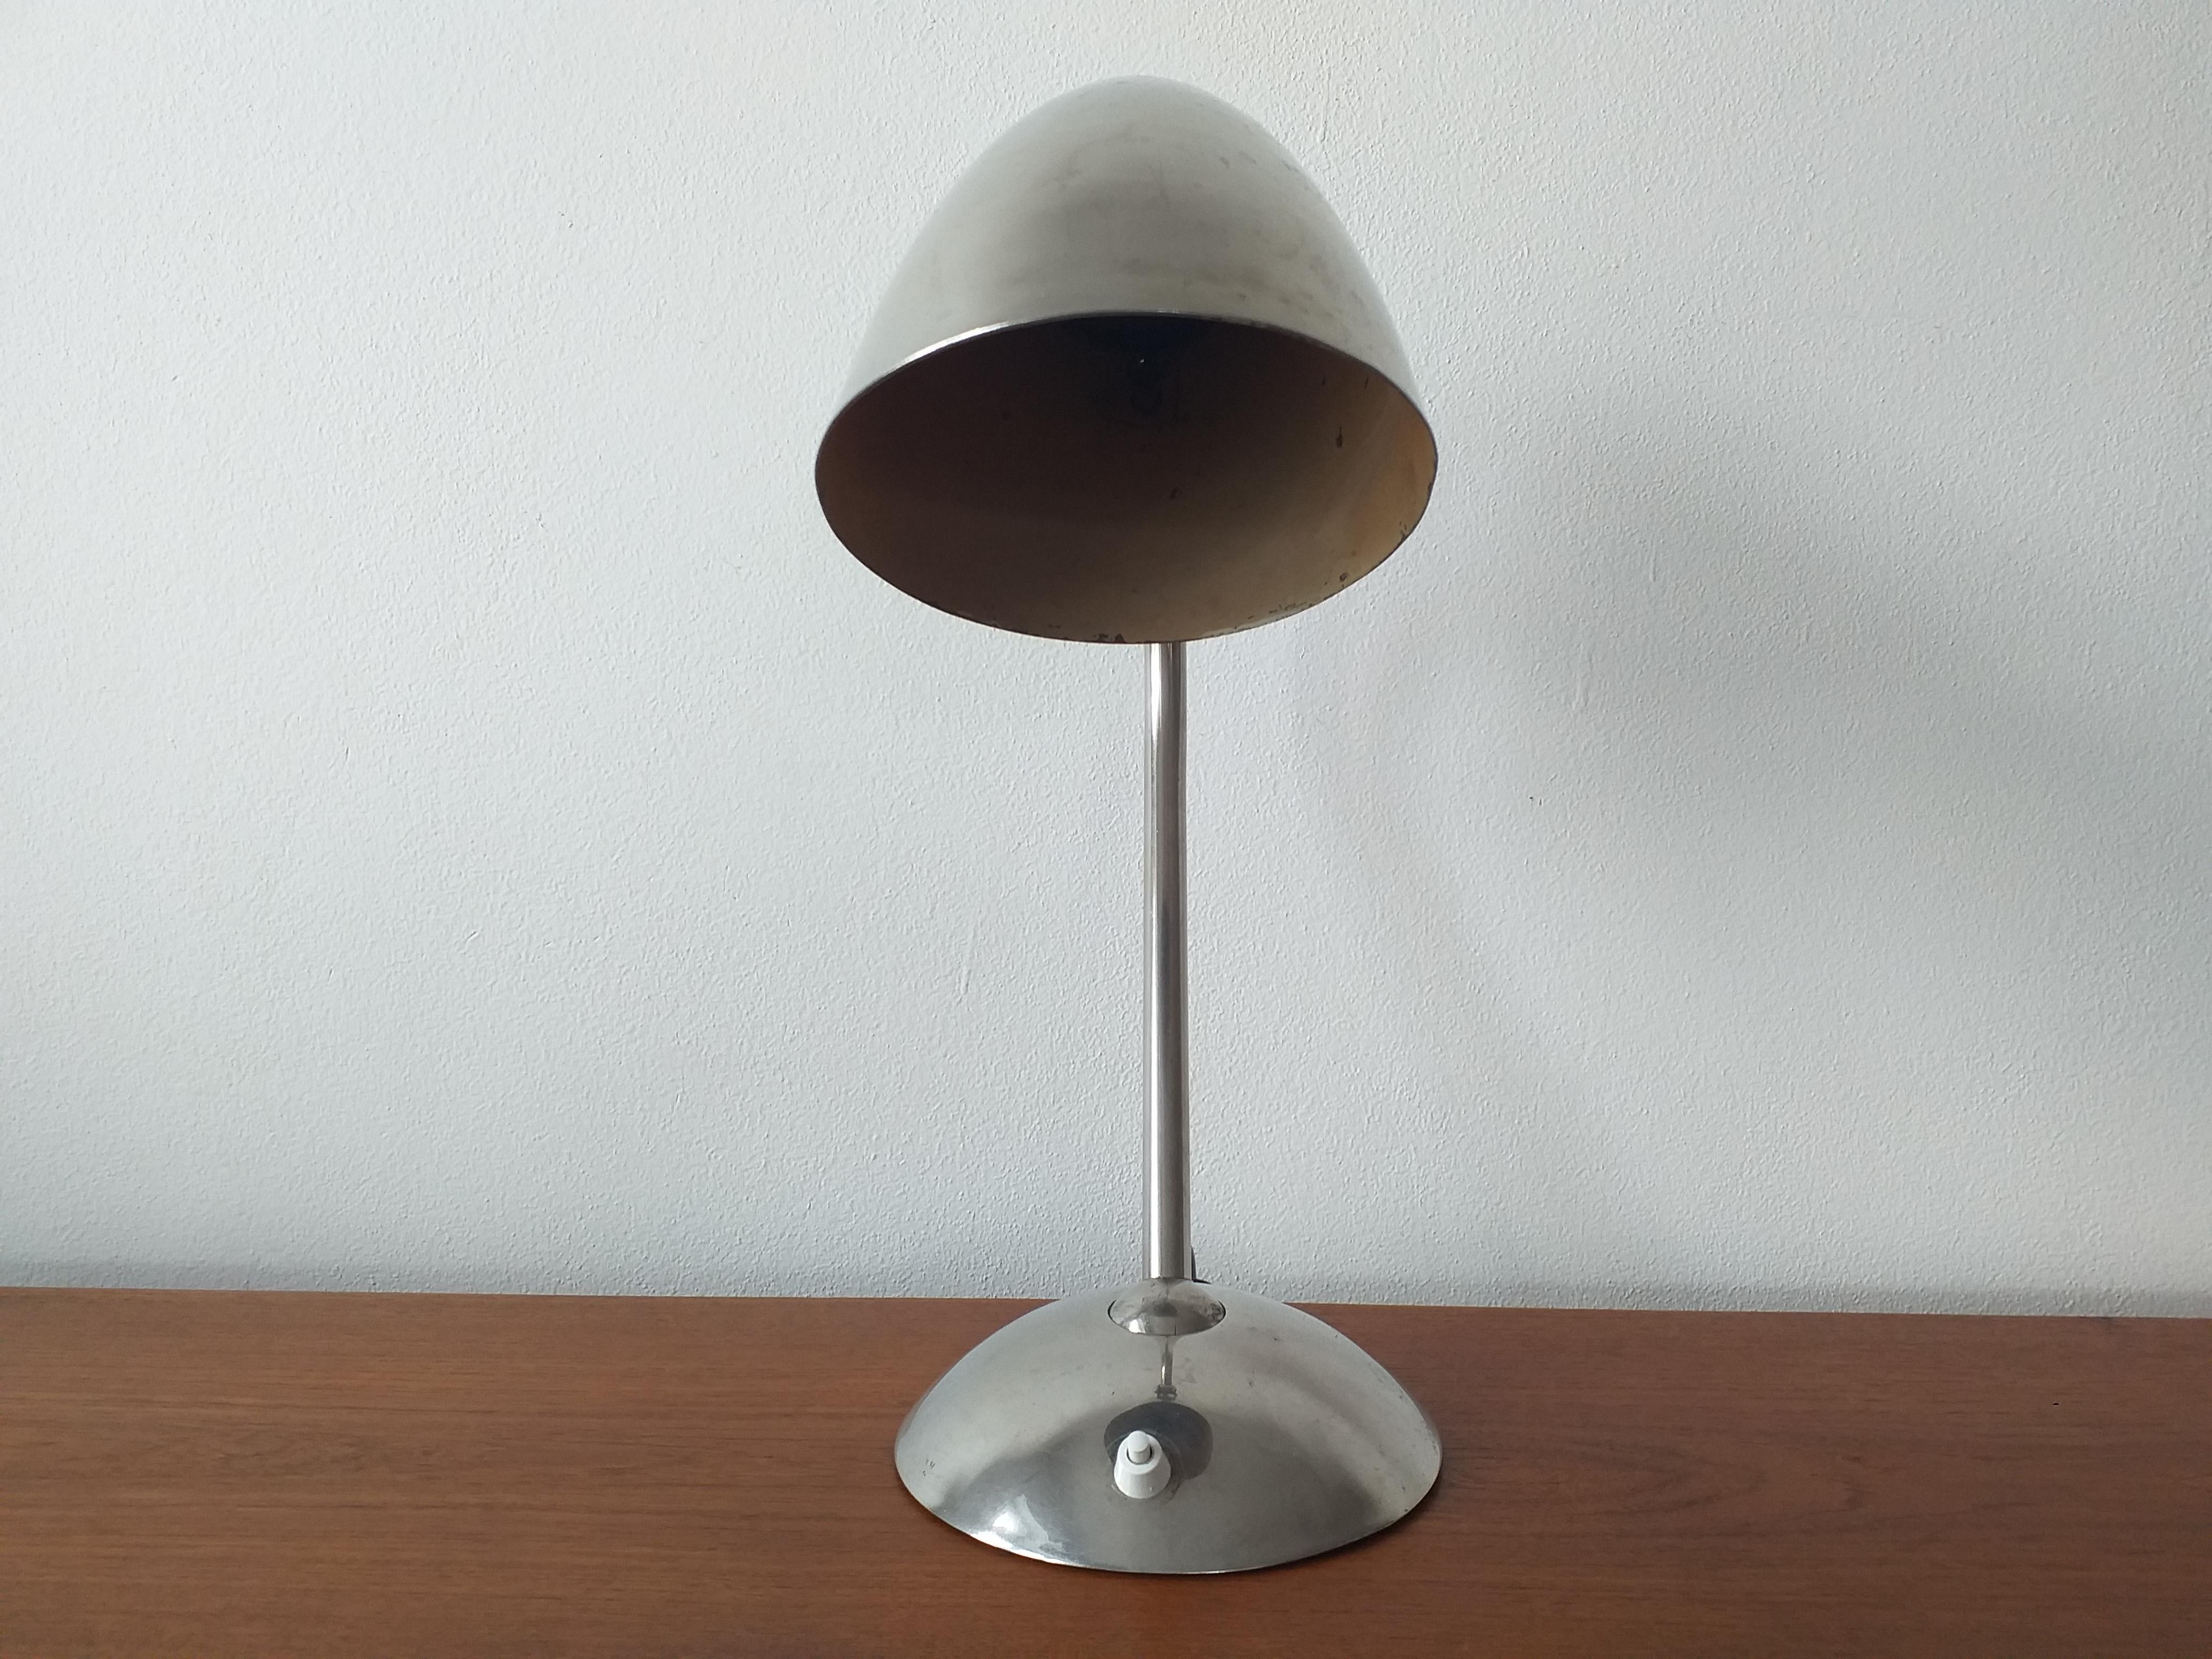 Mid-20th Century Art Deco, Functionalism, Bauhaus Table Lamp, Franta Anyz, 1930s For Sale